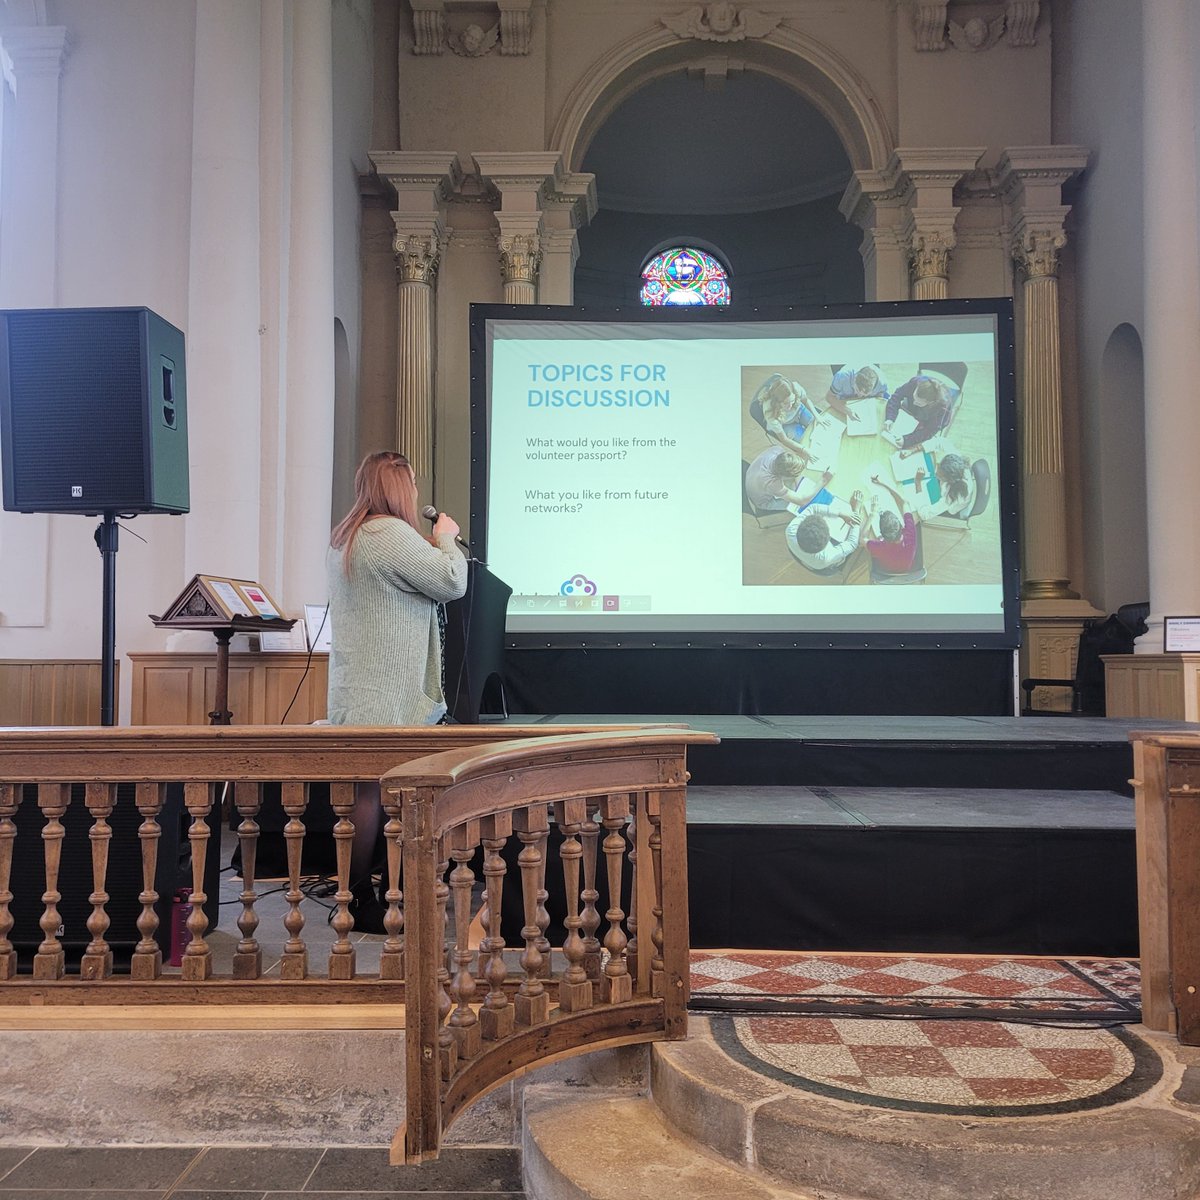 🙋‍♀️Last week Uplift attended the Sunderland Volunteer Co-ordinators Network at Trinity Church.

Contact us to apply for a volunteering role:
📧 contact@upliftassociates.co.uk
☎️ 0191 500 1233/ 0191 563 4401

#volunteerwork #volunteering  #trinitychurch